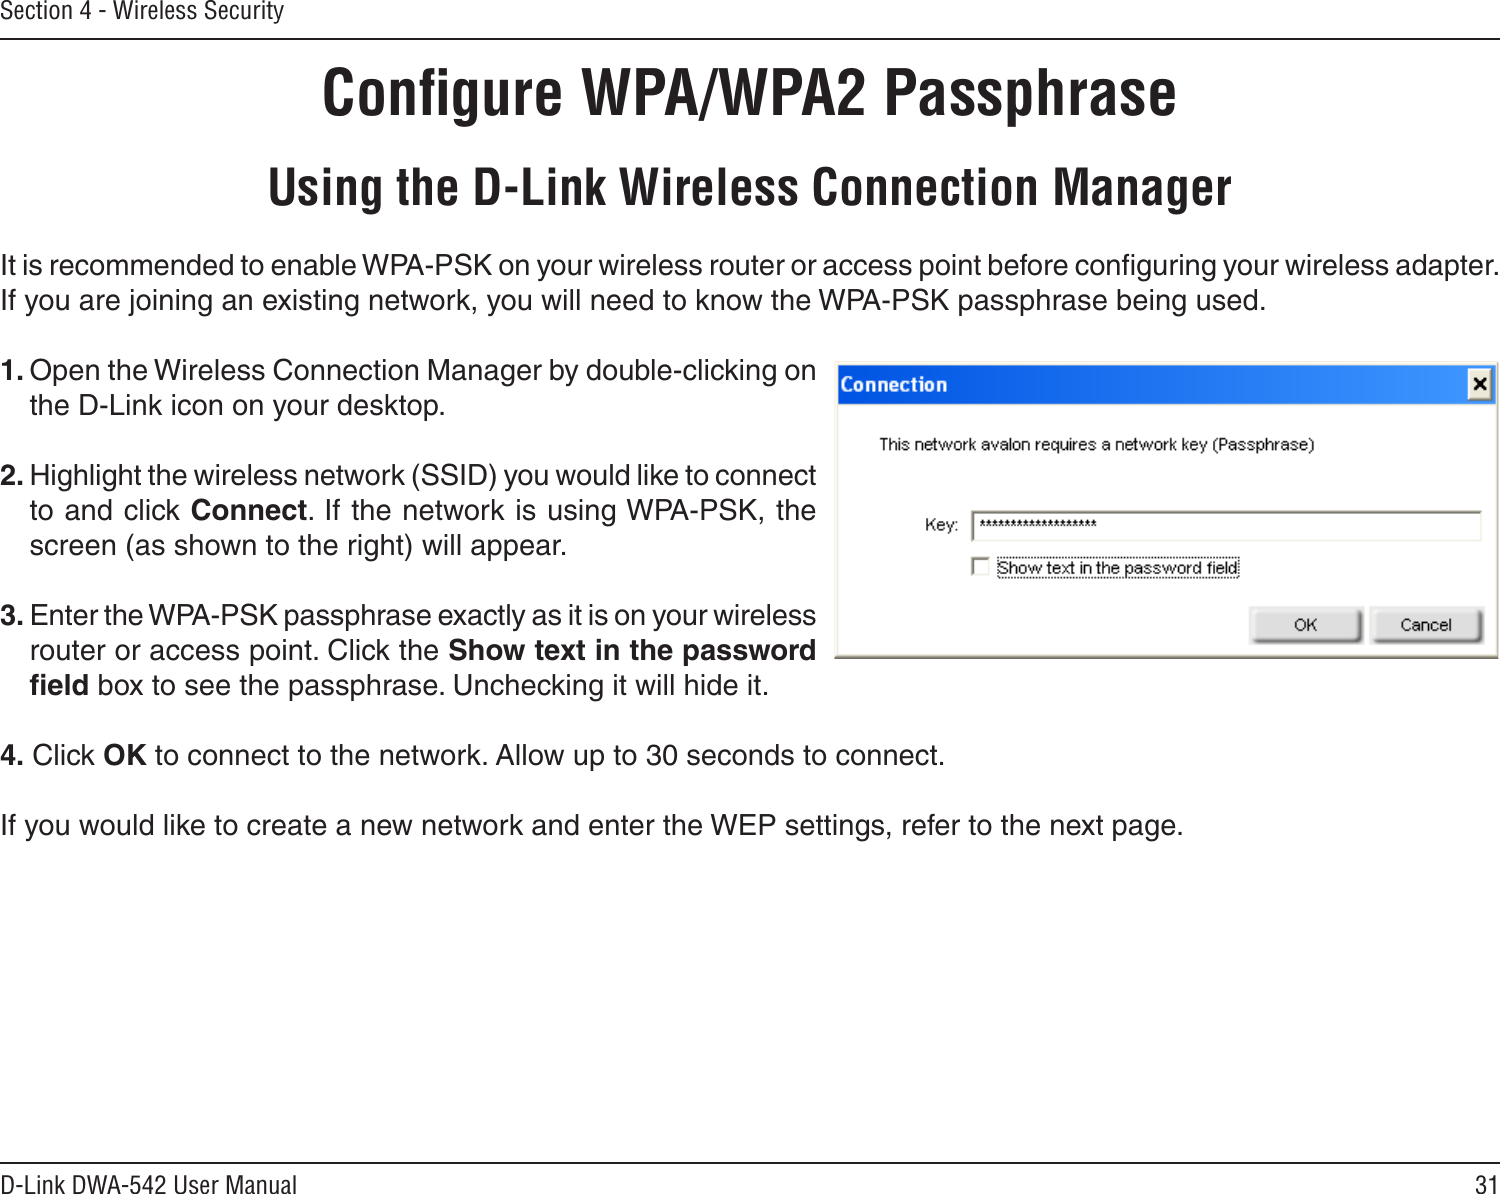 31D-Link DWA-542 User ManualSection 4 - Wireless SecurityConﬁgure WPA/WPA2 PassphraseUsing the D-Link Wireless Connection ManagerIt is recommended to enable WPA-PSK on your wireless router or access point before conﬁguring your wireless adapter. If you are joining an existing network, you will need to know the WPA-PSK passphrase being used.1. Open the Wireless Connection Manager by double-clicking on the D-Link icon on your desktop. 2. Highlight the wireless network (SSID) you would like to connect to and click Connect. If the network is using WPA-PSK, the screen (as shown to the right) will appear. 3. Enter the WPA-PSK passphrase exactly as it is on your wireless router or access point. Click the Show text in the password ﬁeld box to see the passphrase. Unchecking it will hide it.4. Click OK to connect to the network. Allow up to 30 seconds to connect.If you would like to create a new network and enter the WEP settings, refer to the next page.